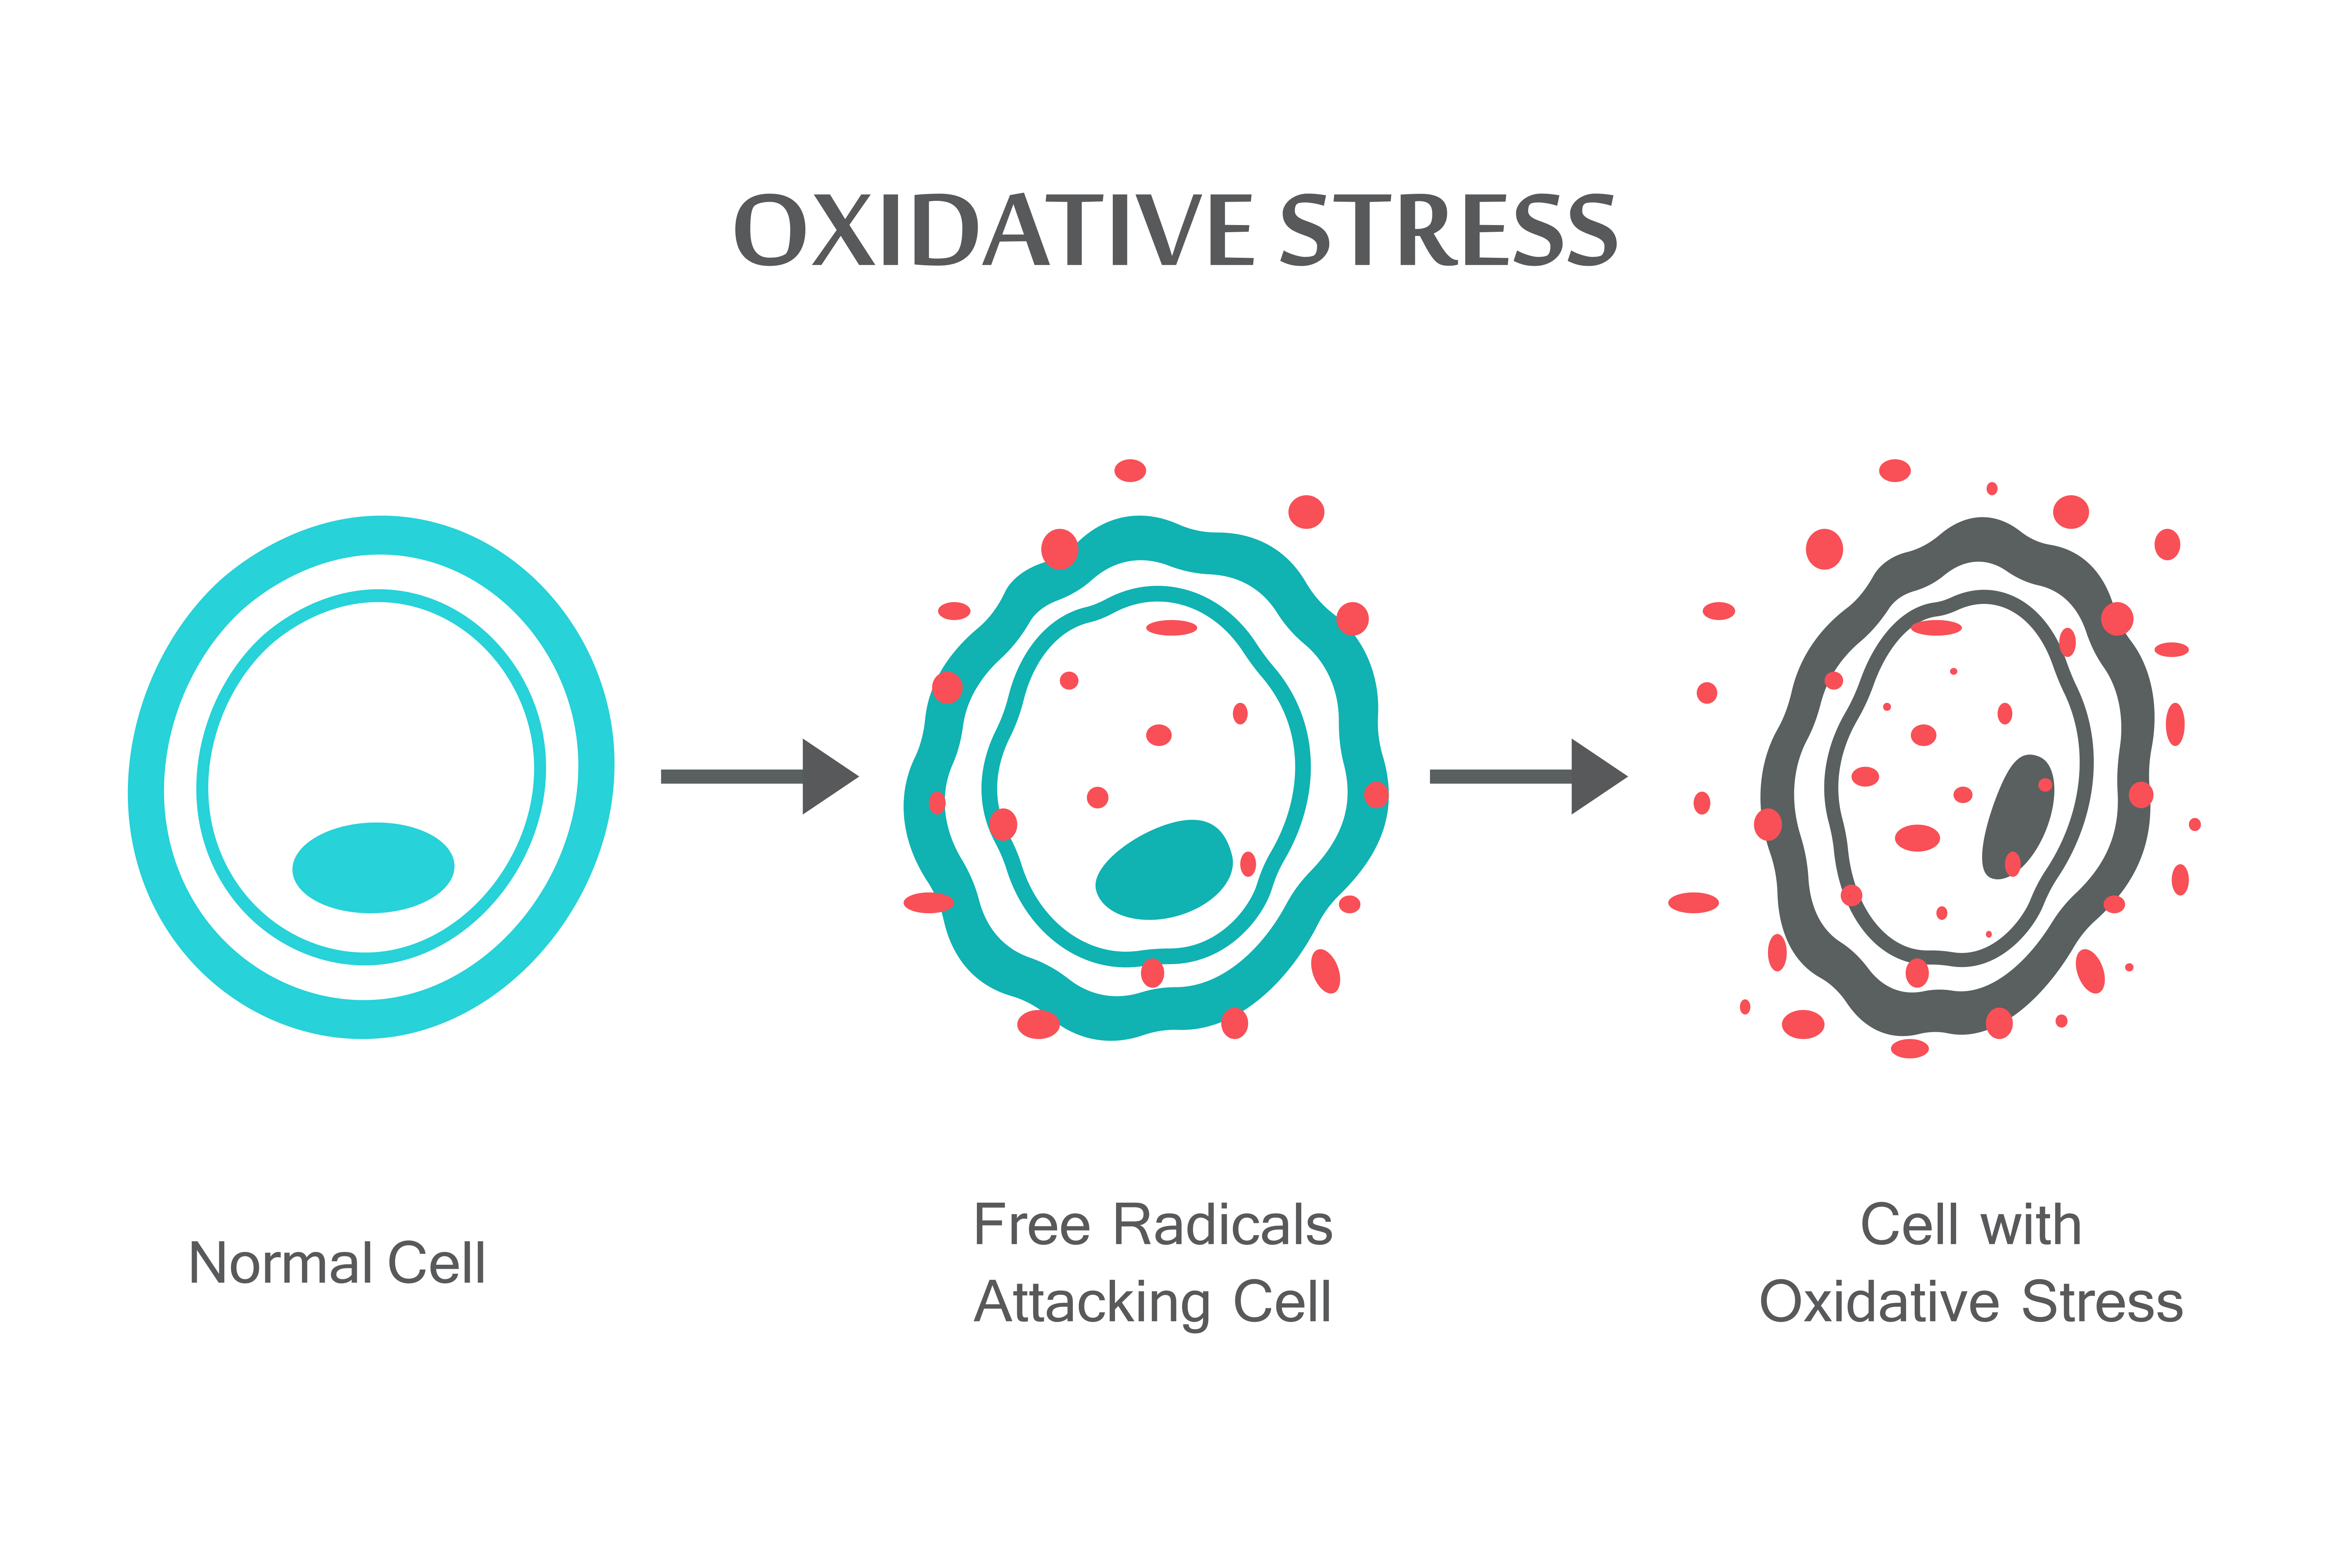 Excessive oxidative stress can be the main cause of cells degradation